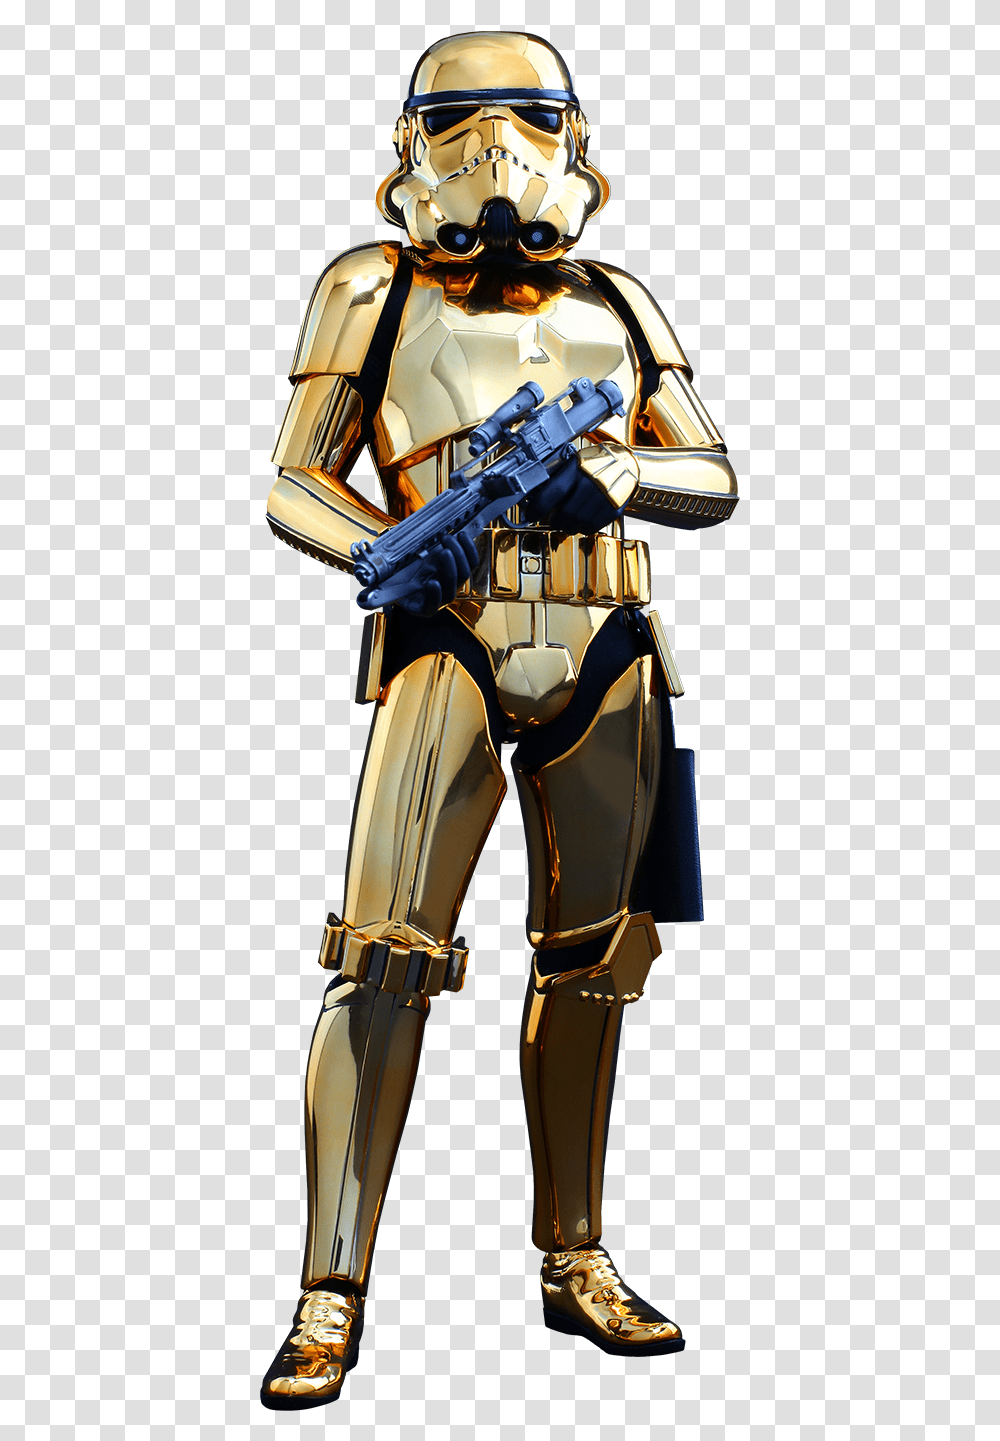 Star Wars Stormtrooper Gold And Copper Stormtrooper, Helmet, Clothing, Apparel, Toy Transparent Png